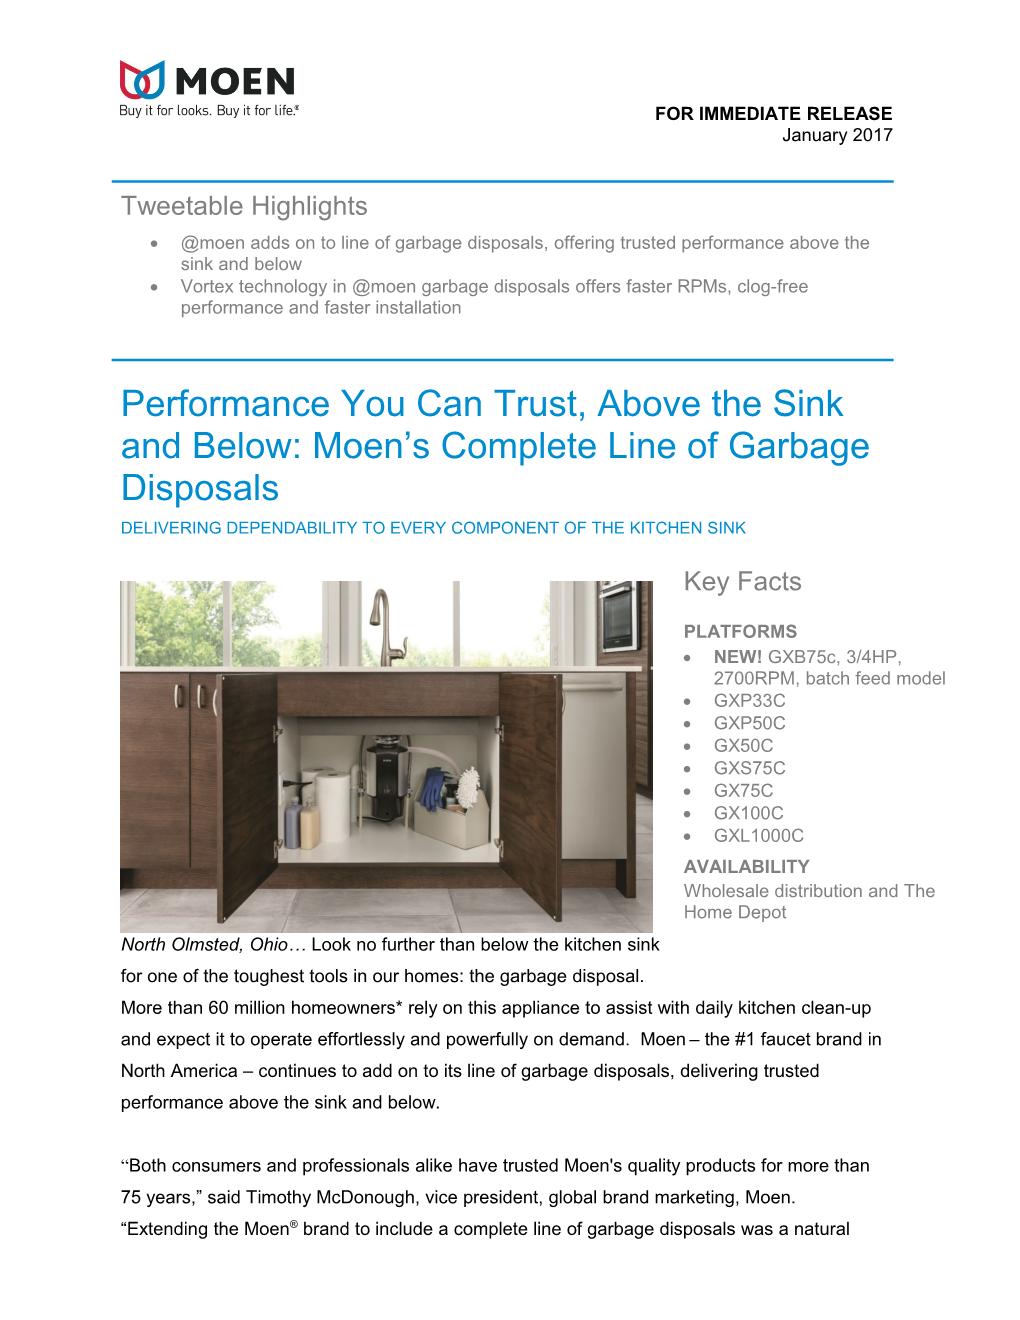 Moen Adds on to Line of Garbage Disposals, Offering Trusted Performance Above the Sink